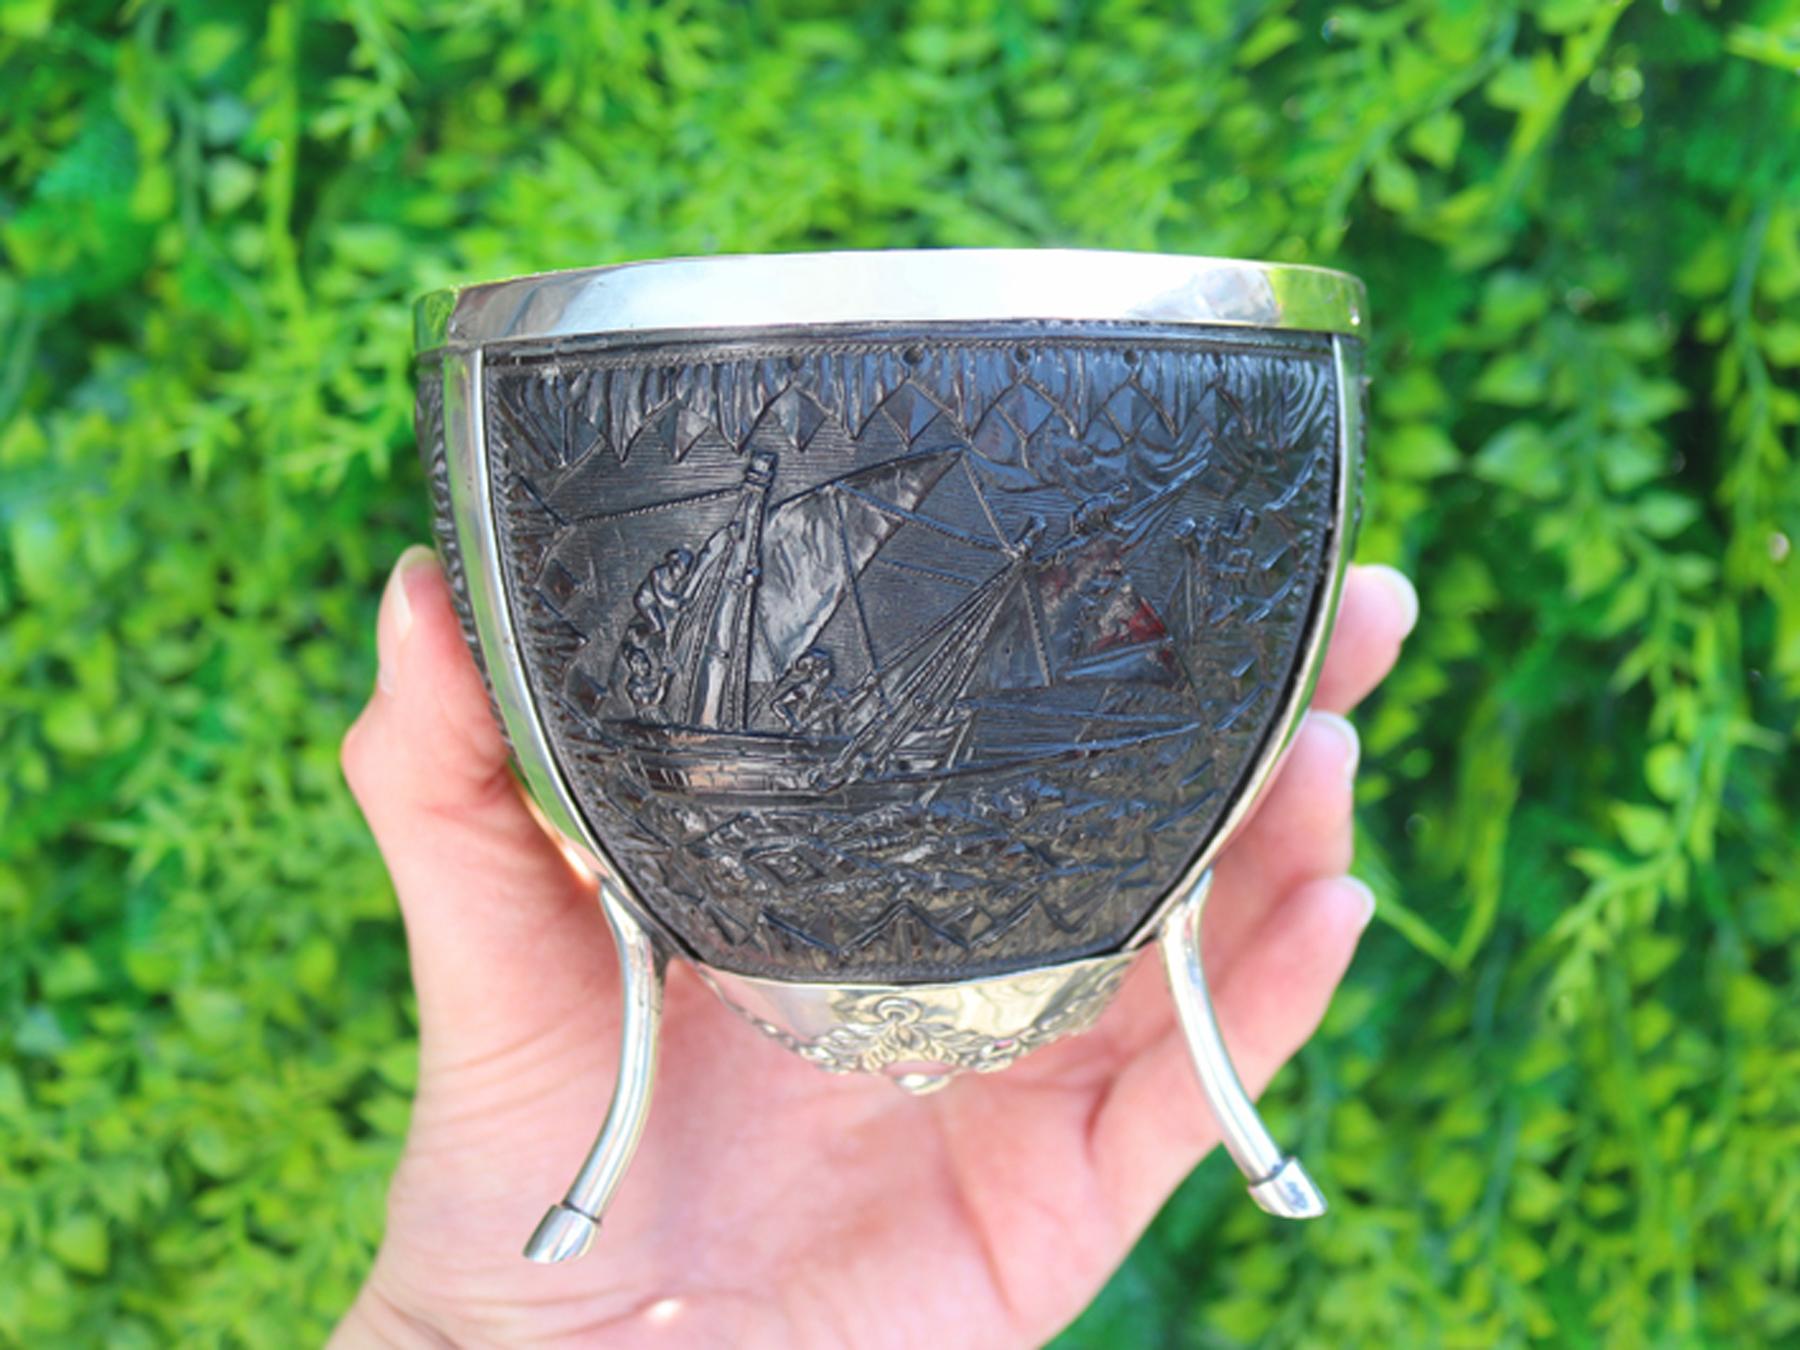 An exceptional, fine and impressive antique continental silver mounted coconut cup with nautical interest; an addition to our diverse ornamental silverware collection.

This exceptional antique silver mounted coconut cup has flared rim and plain